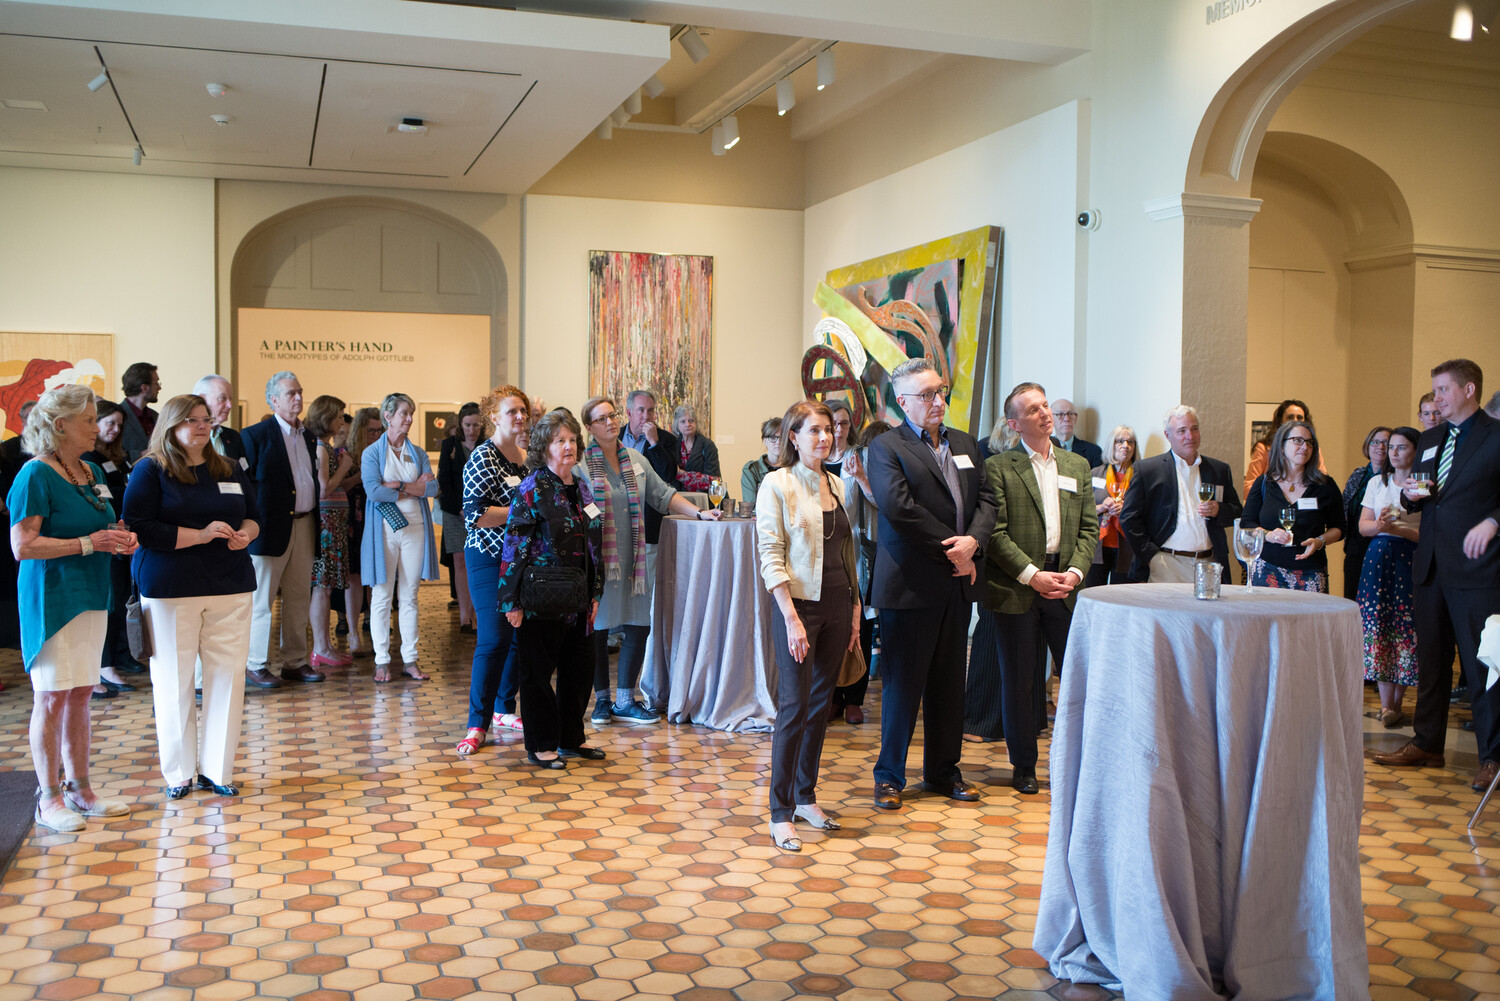 UVA Arts Council members and faculty enjoy a reception honoring Moisés Kaufman at The Fralin Museum of Art during his mini-residency.